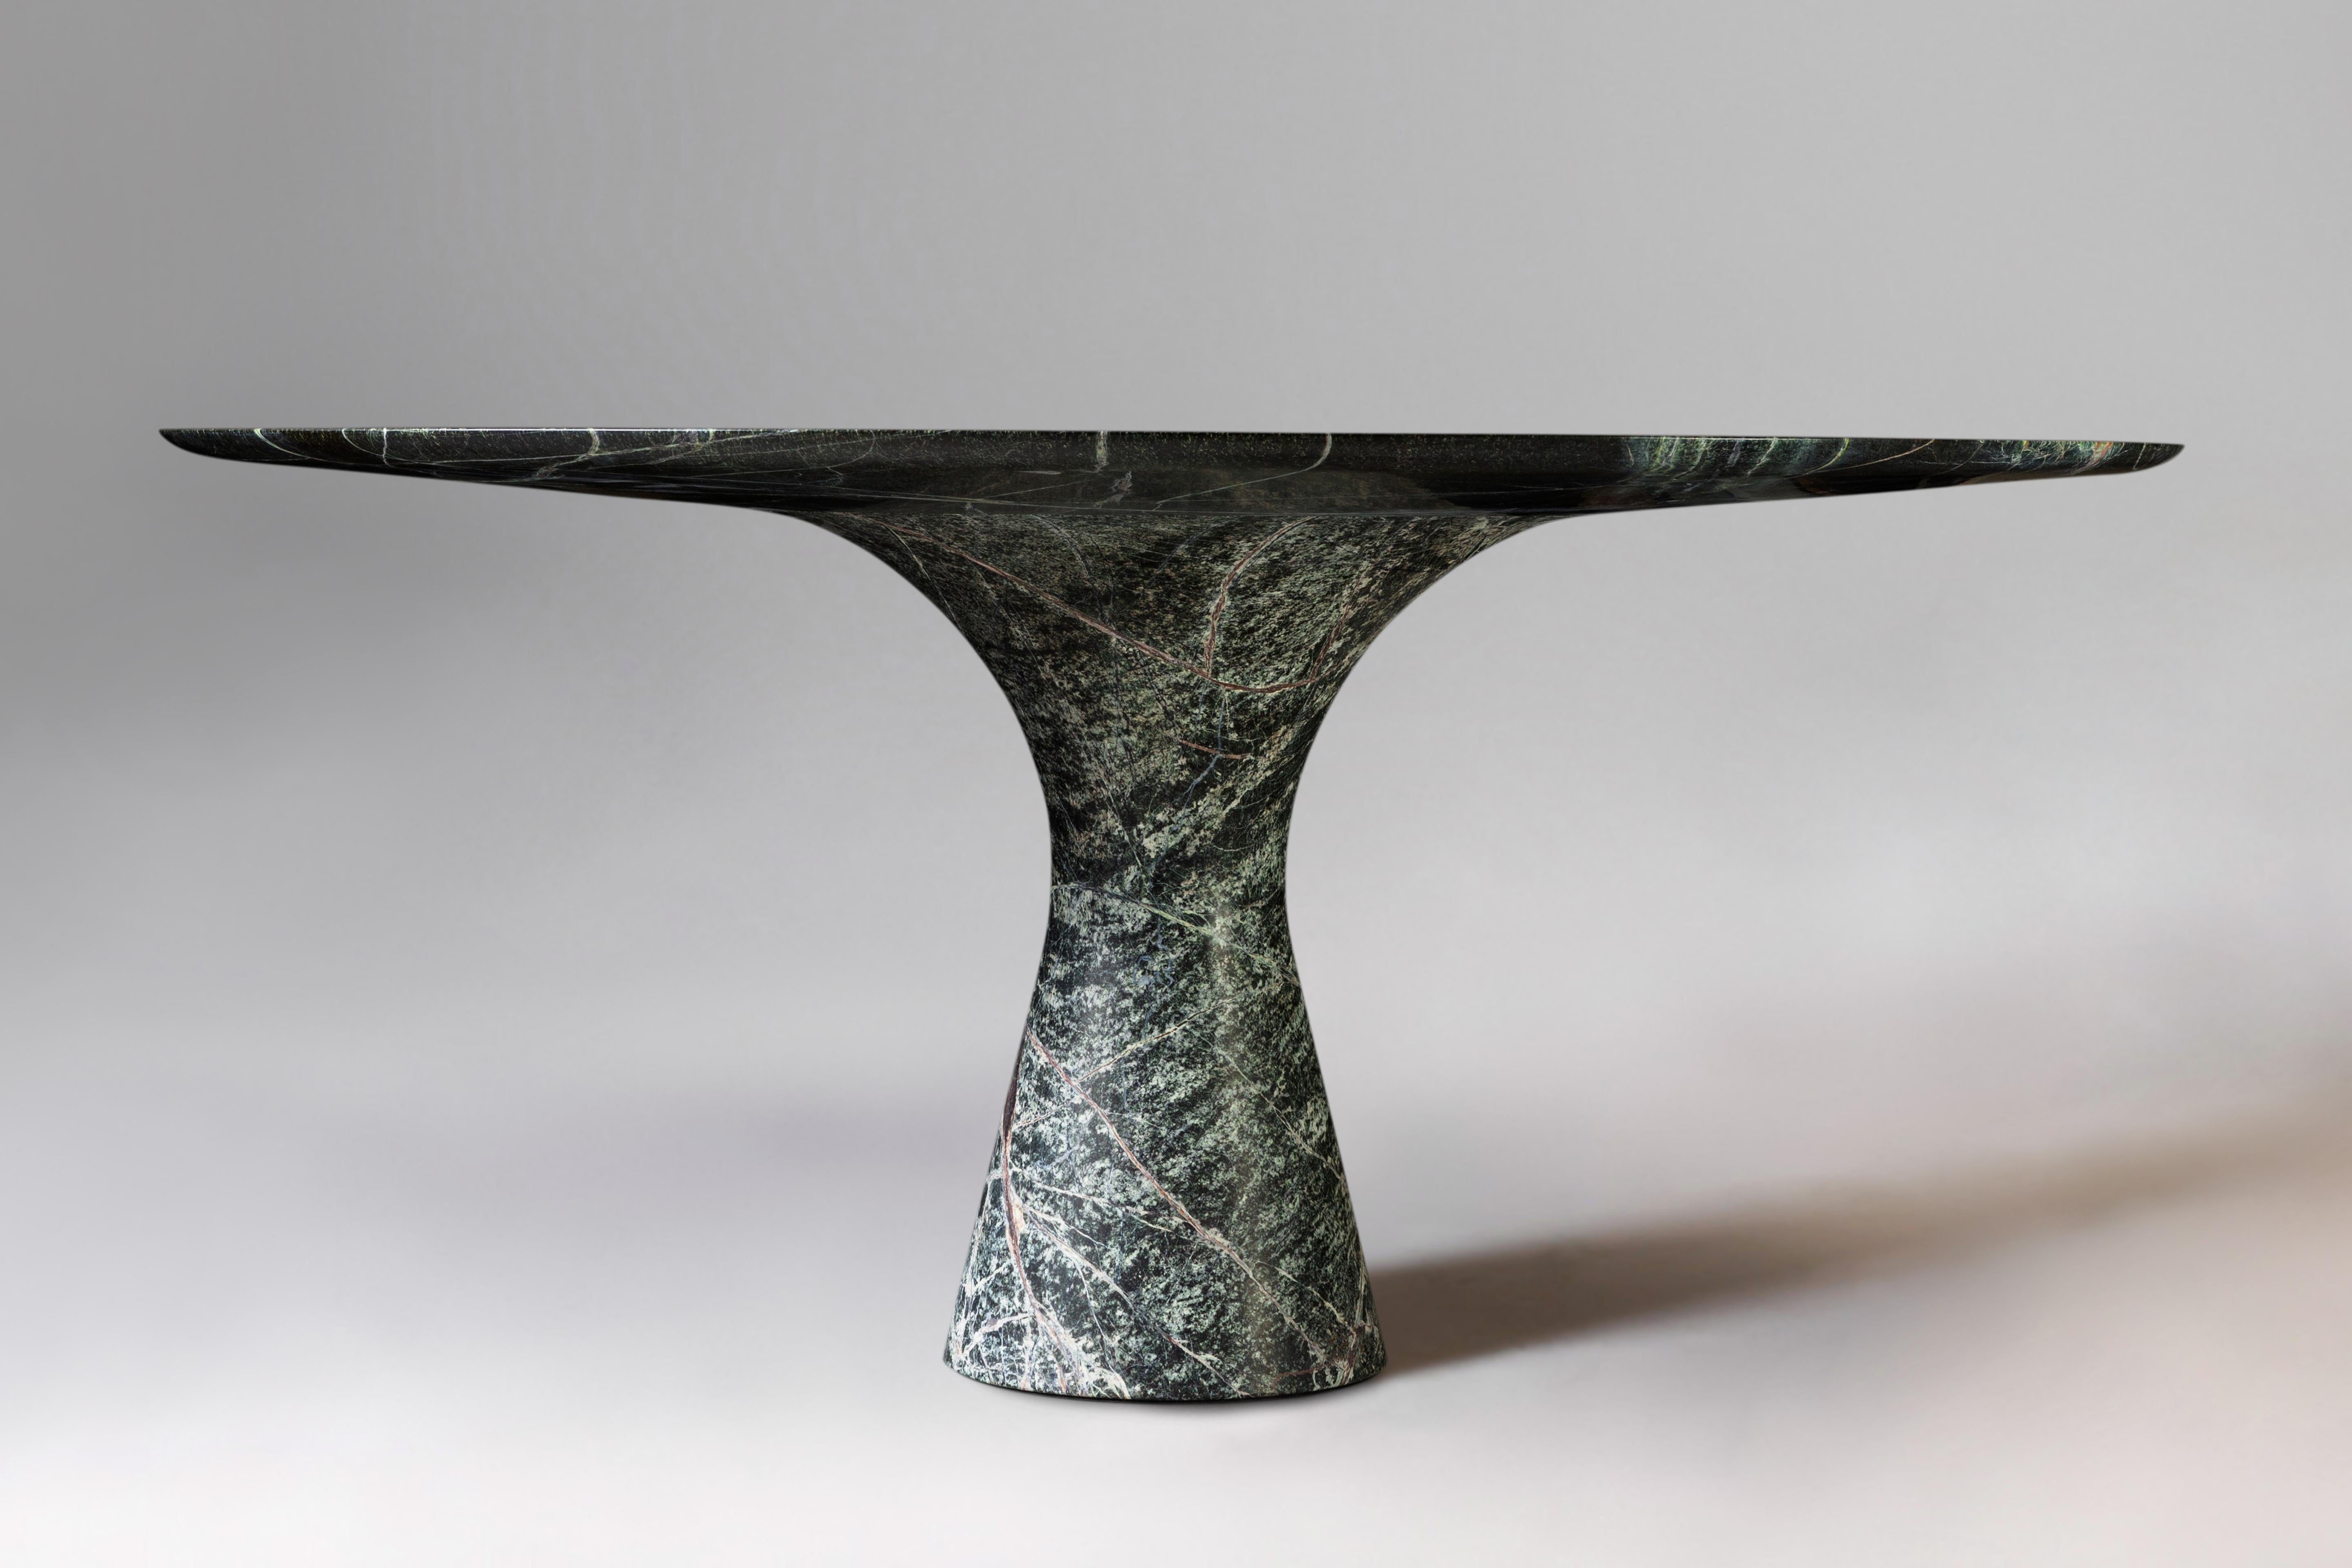 Picasso Green refined contemporary marble dining table 250/75
Dimensions: 250 x 160 x 75 cm
Materials: Picasso Green marble.

Angelo is the essence of a round table in natural stone, a sculptural shape in robust material with elegant lines and